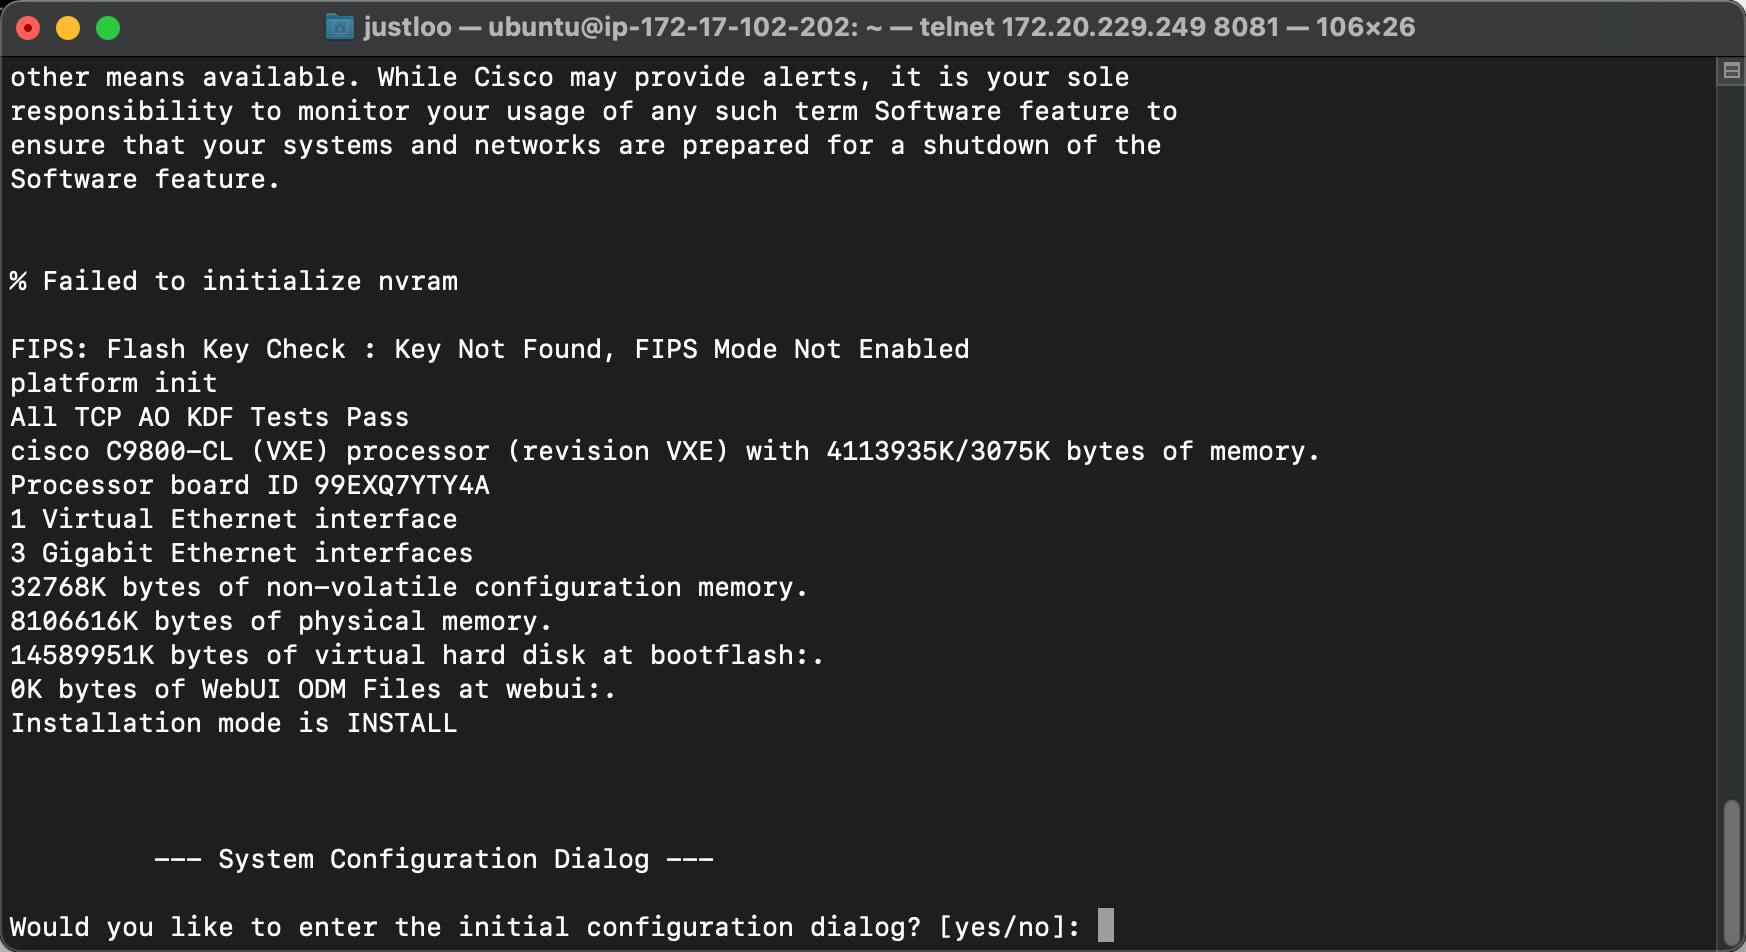 9800-CL by using Telnet to the ESXi and assigned port